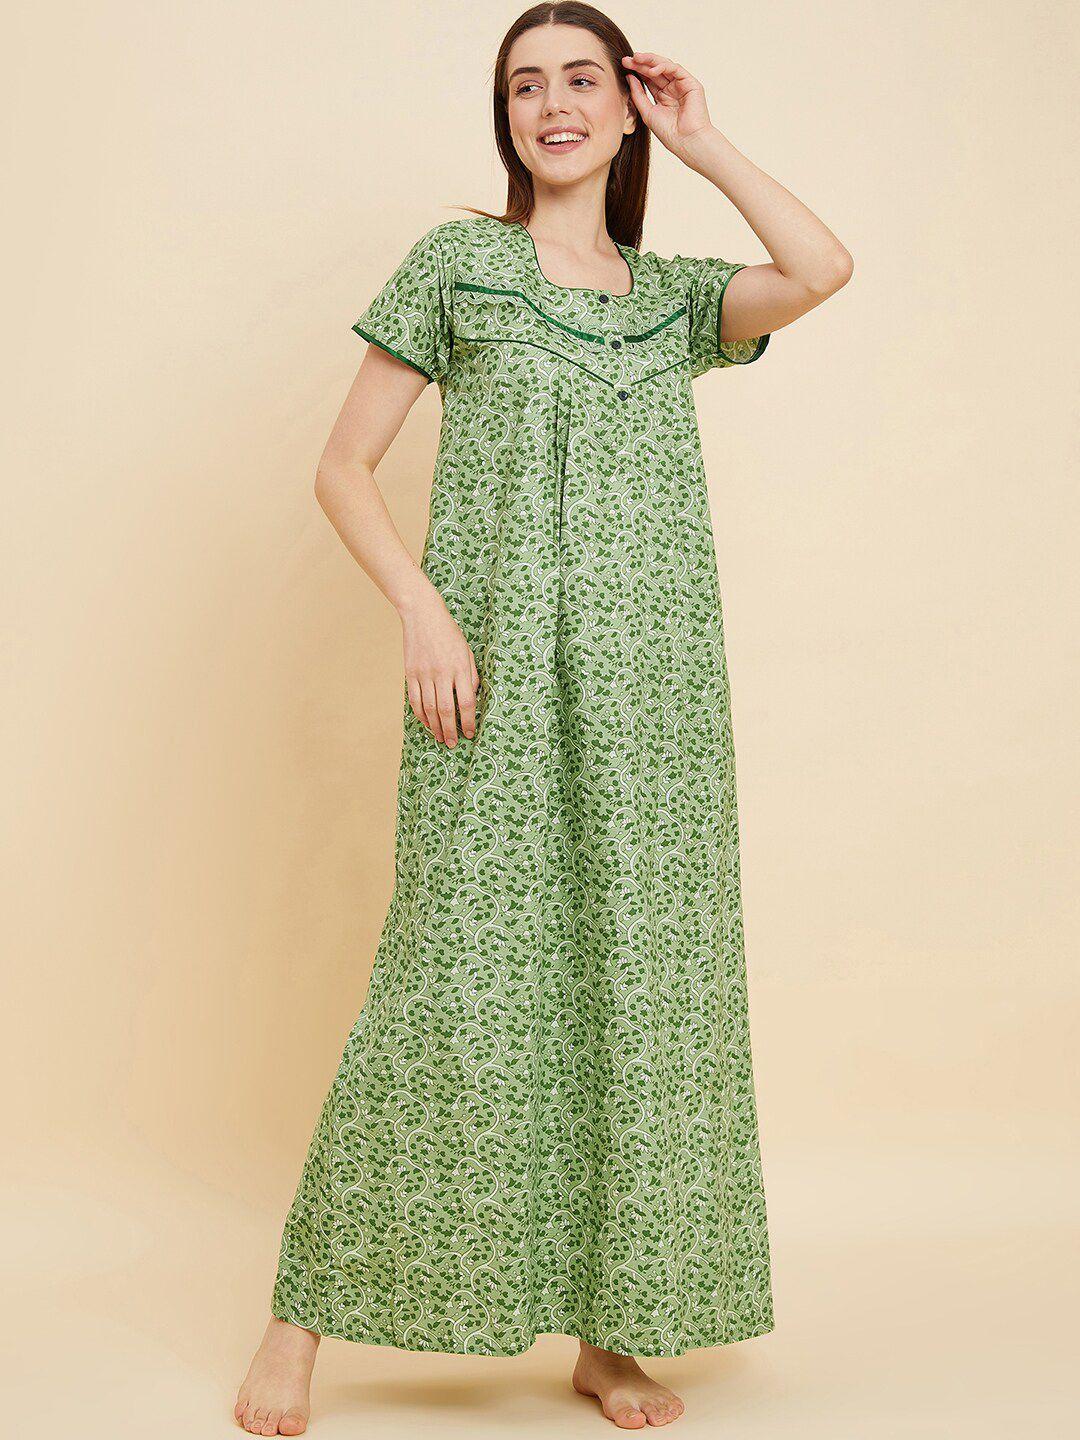 sweet-dreams-green-floral-printed-pure-cotton-maxi-nightdress